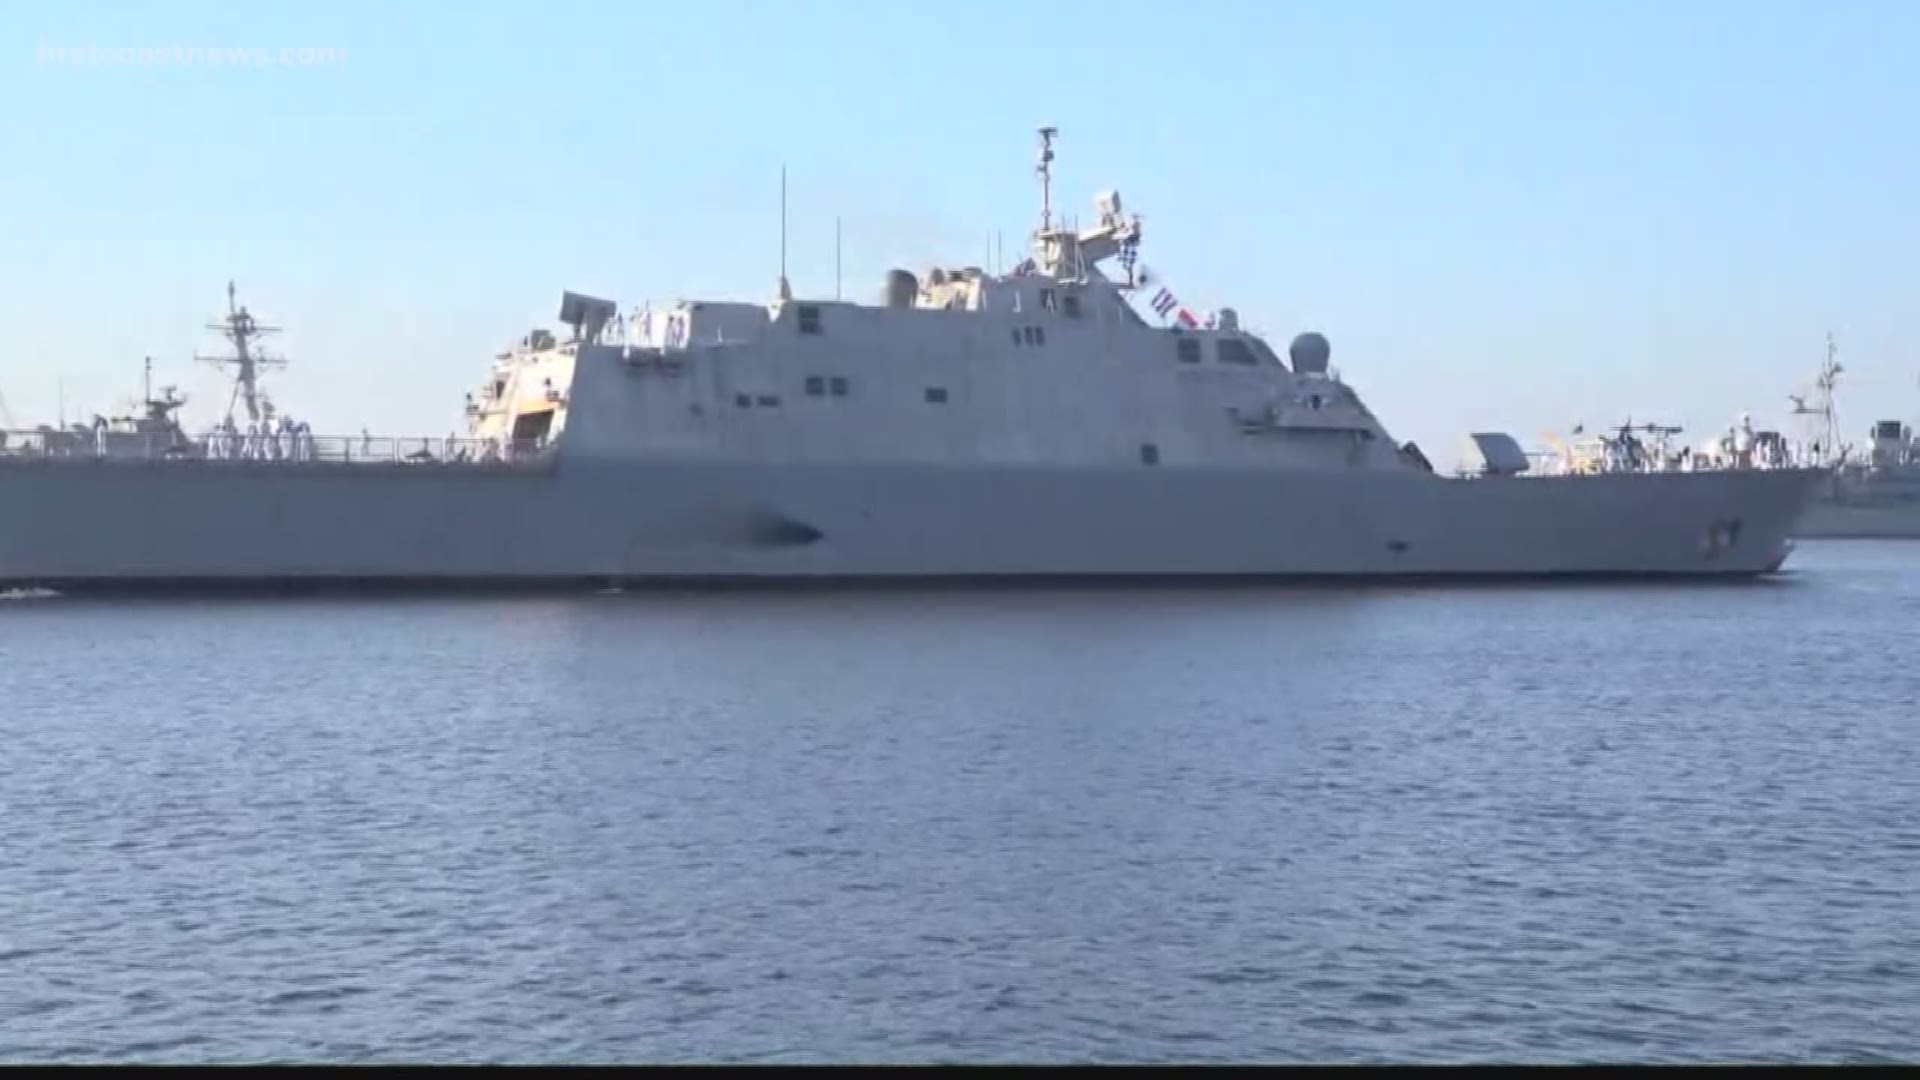 Mayport will be the ship's new home port after it was commissioned at the U.S. Naval Academy in Annapolis, Maryland.